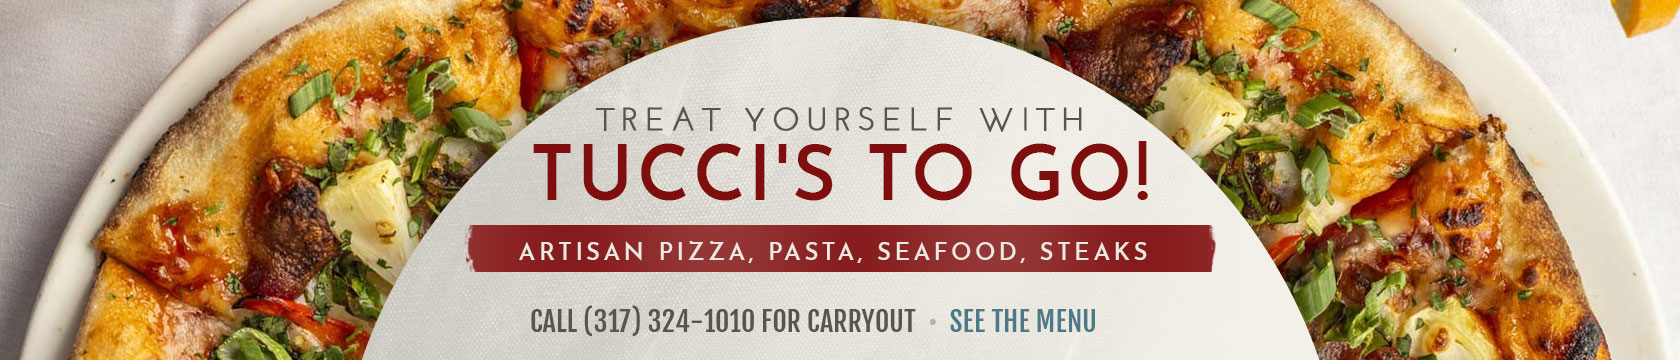 Treat yourself with Tucci’s To Go! Artisan Pizza, Pasta, Seafood, Steaks. Call (317) 324-1010 for Carryout. View the Menu.